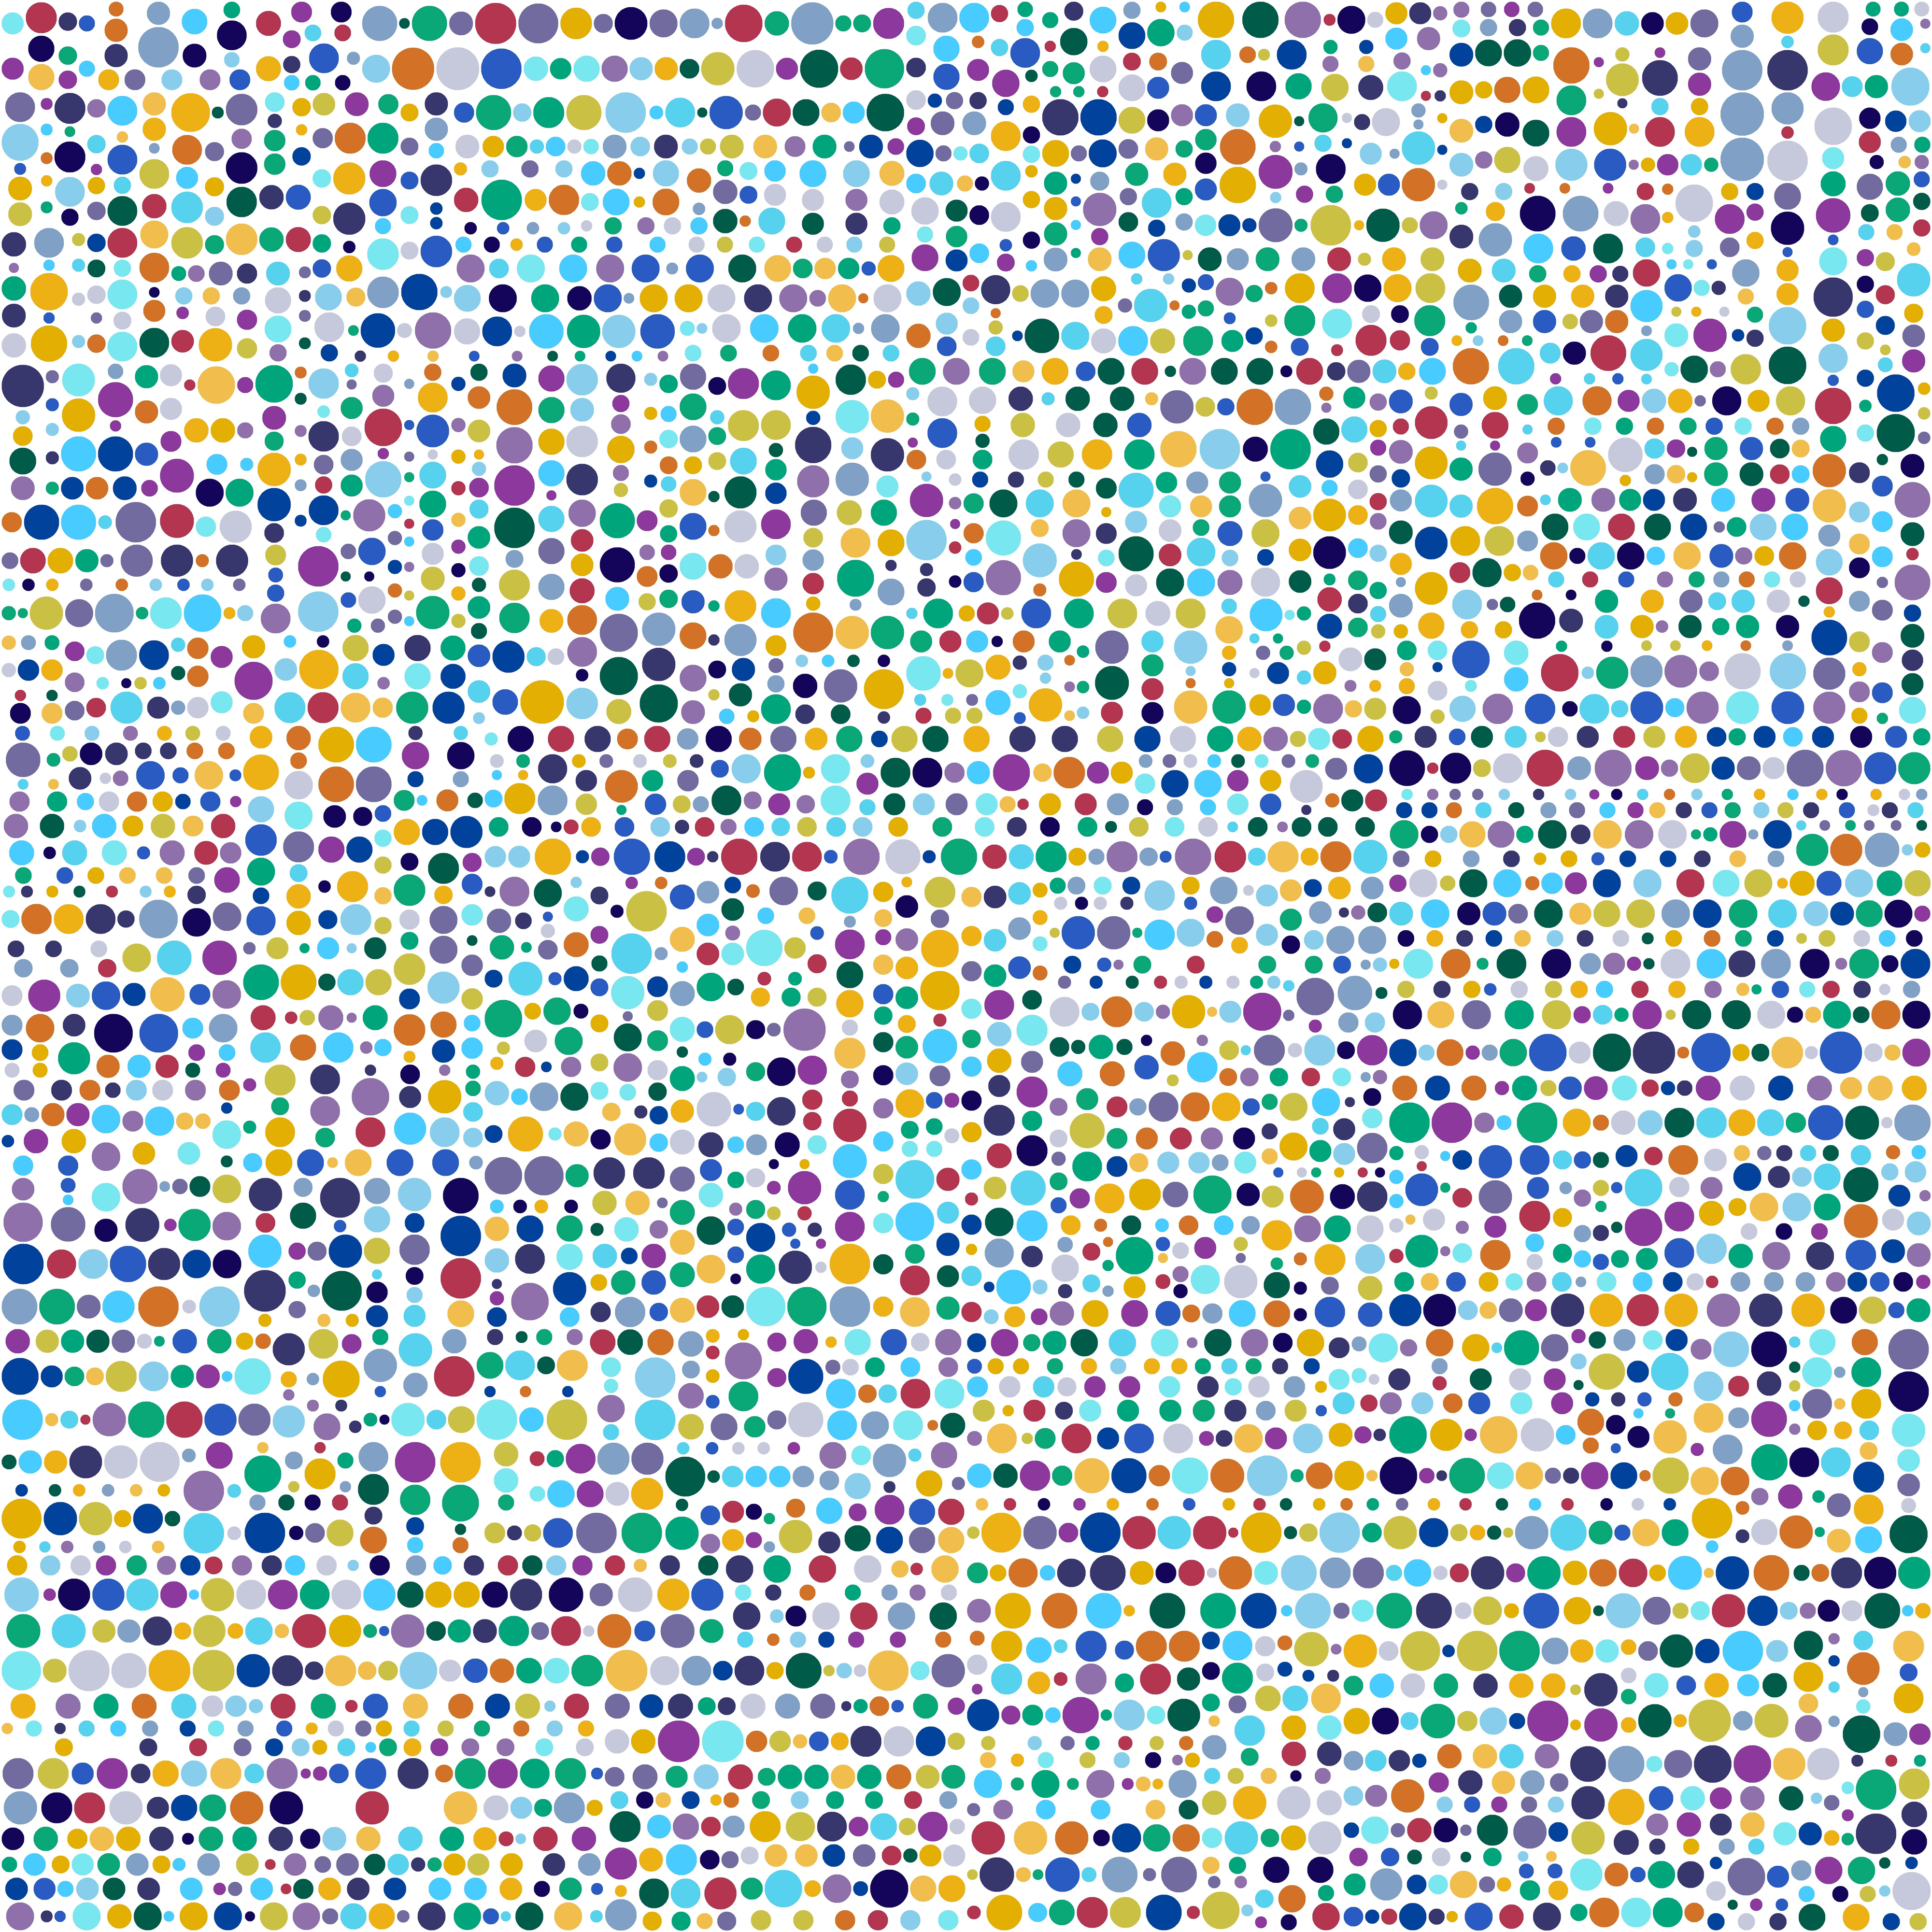 'ETH Bright 4362’ - 1/1 Abstract NFT Art - Ethereum All-Time-High - MooniTooki Project – @6480 x 6480 pixels - 2022 NFT Release #1